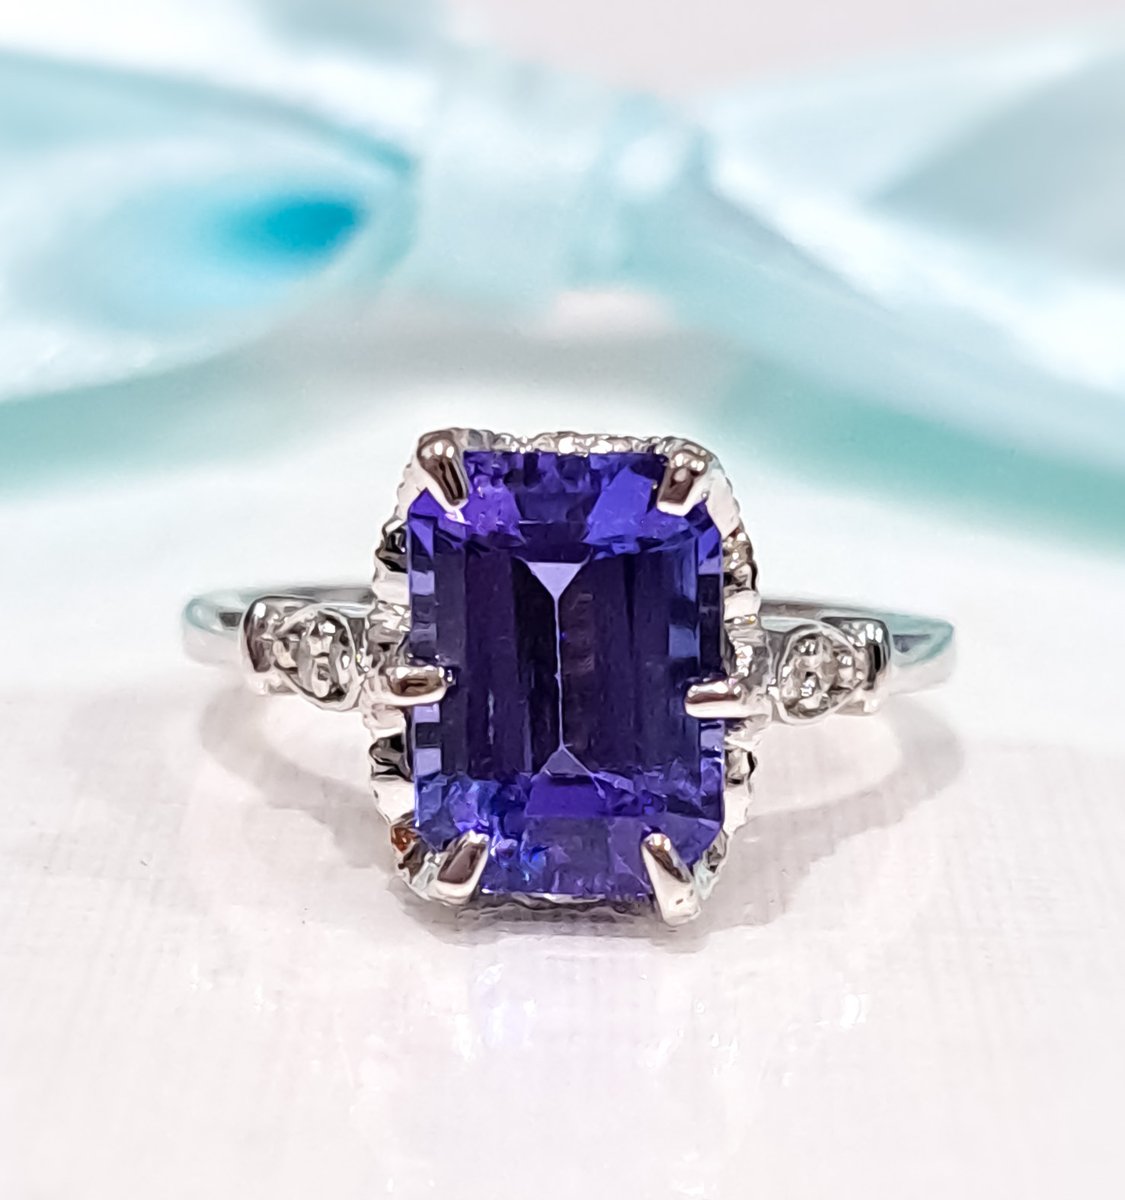 Excited to share the latest addition to my #etsy shop: Tanzanite Gold Ring * Classic Jewelry etsy.me/3FwQzCp #tanzanite #blue #unisexadults #gold #prong #emerald #tanzanitegoldring #14ktanzanitering #emeraldcutgemstone